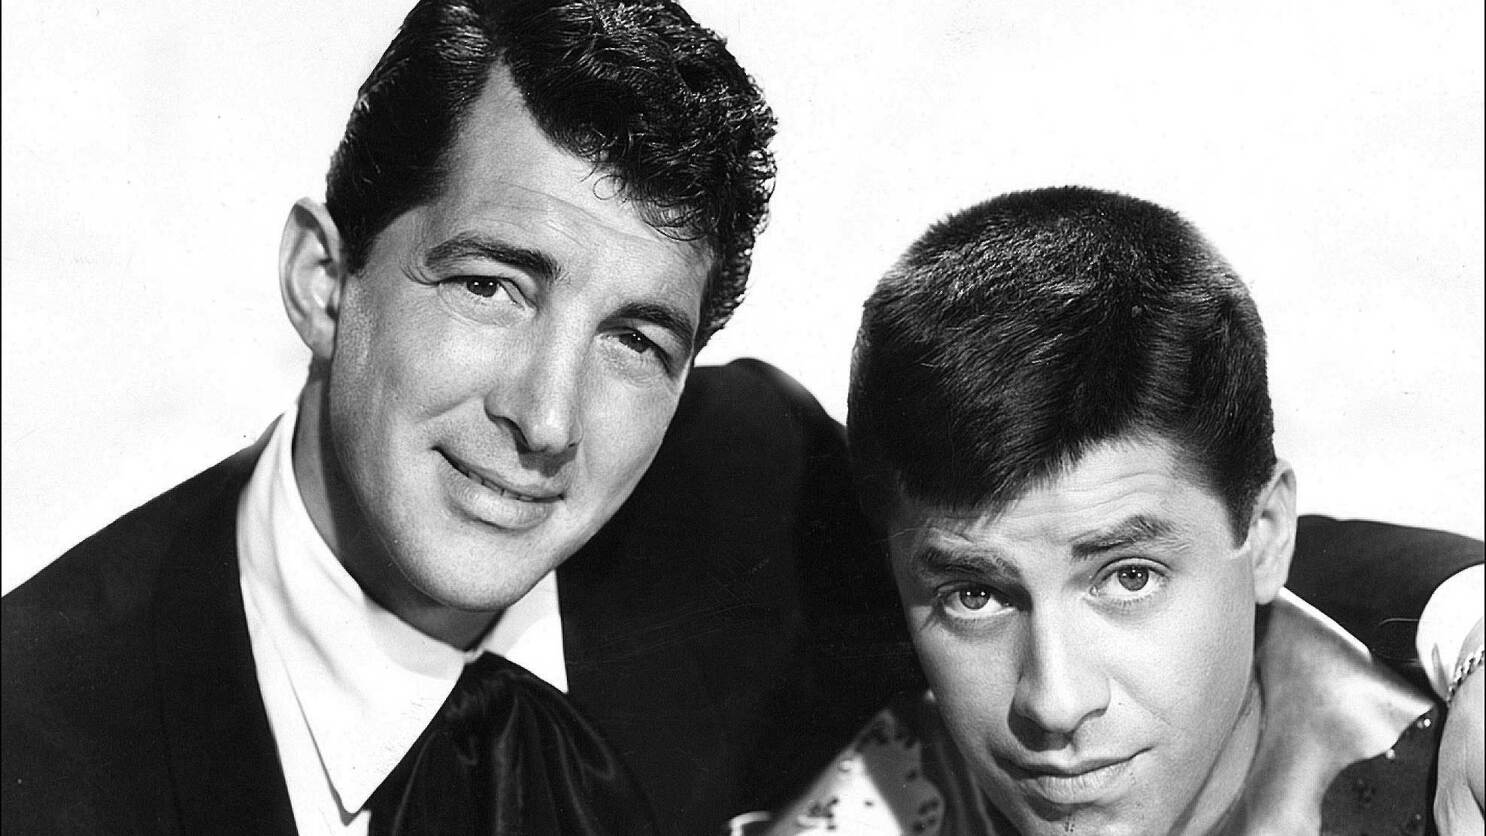 Details about   1995 newspaper Singer DEAN MARTIN DEAD Former partner Comedy Duo w JERRY LEWIS 